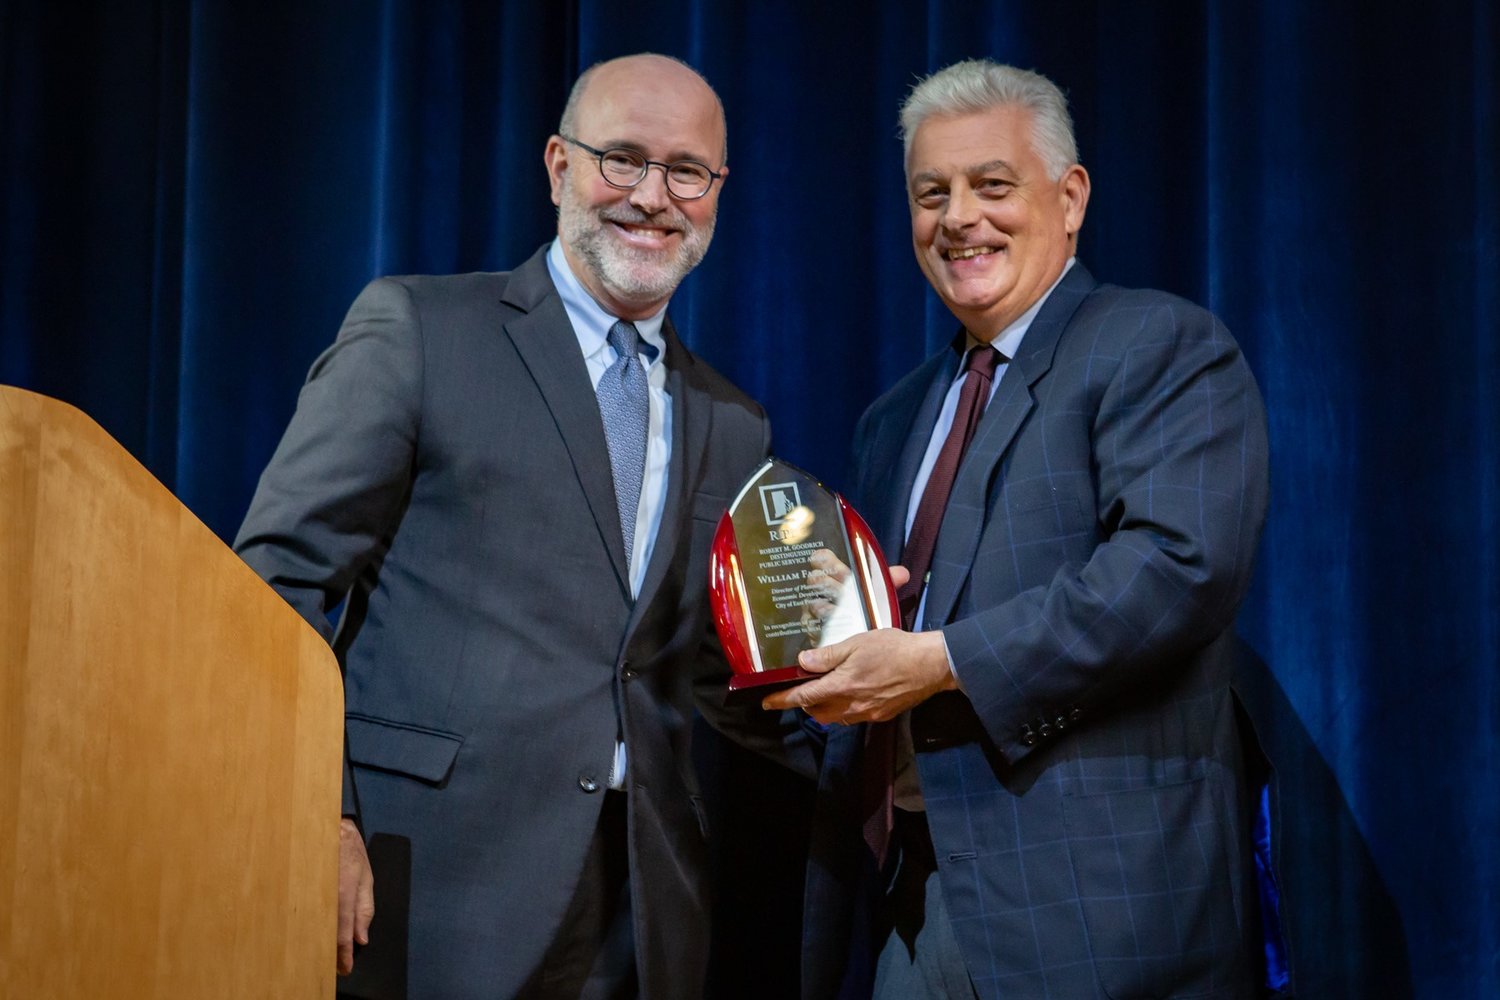 RIPEC board vice chairman Patrick Rogers (left), a partner in the law firm Hinckly Allen & Snyder LLP and former East Providence City Councilor, presents Bill Fazioli with the body’s Robert M. Goodrich Distinguished Public Service Award.